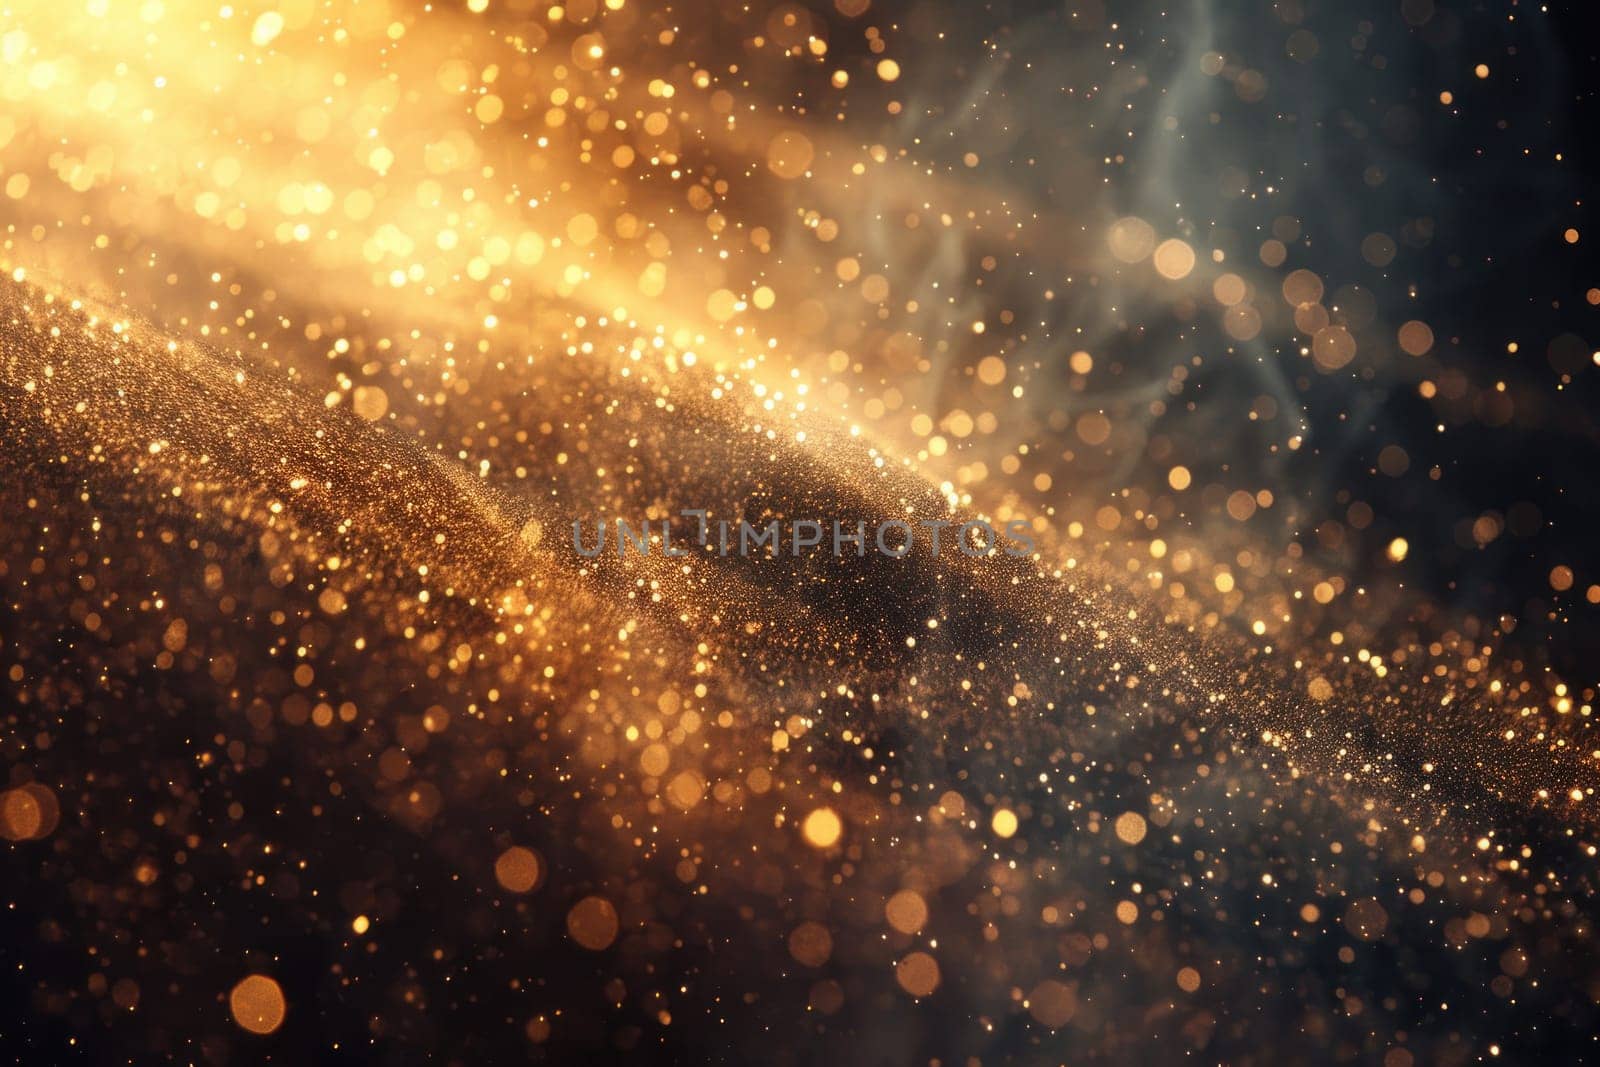 The image is a blurry, hazy, and dreamy scene with a lot of glitter.